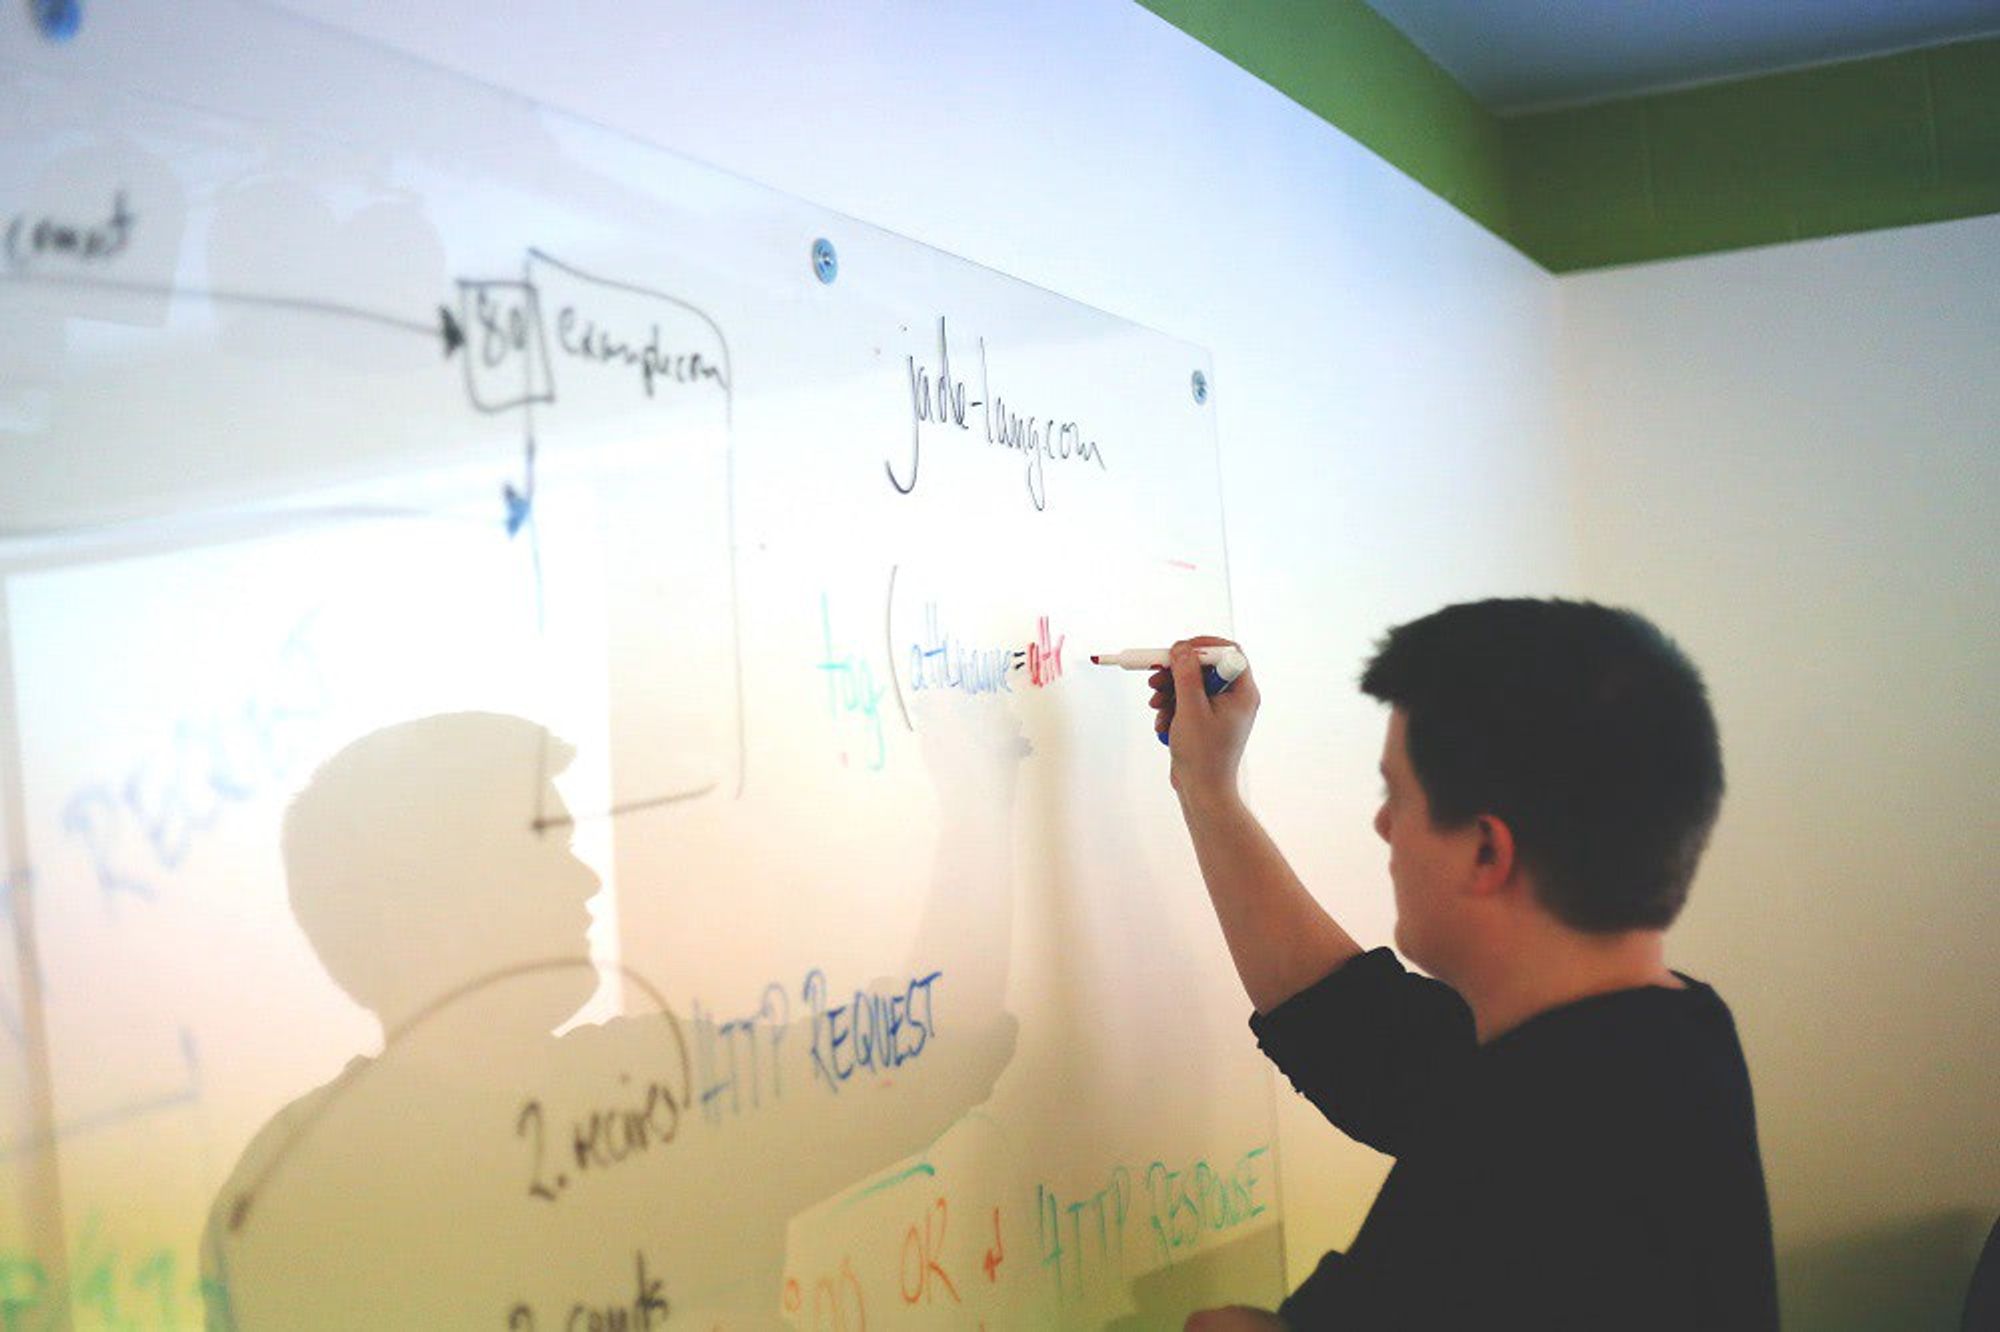 Here’s a picture of a generic whiteboard… because it’s on topic and not at all redundant…